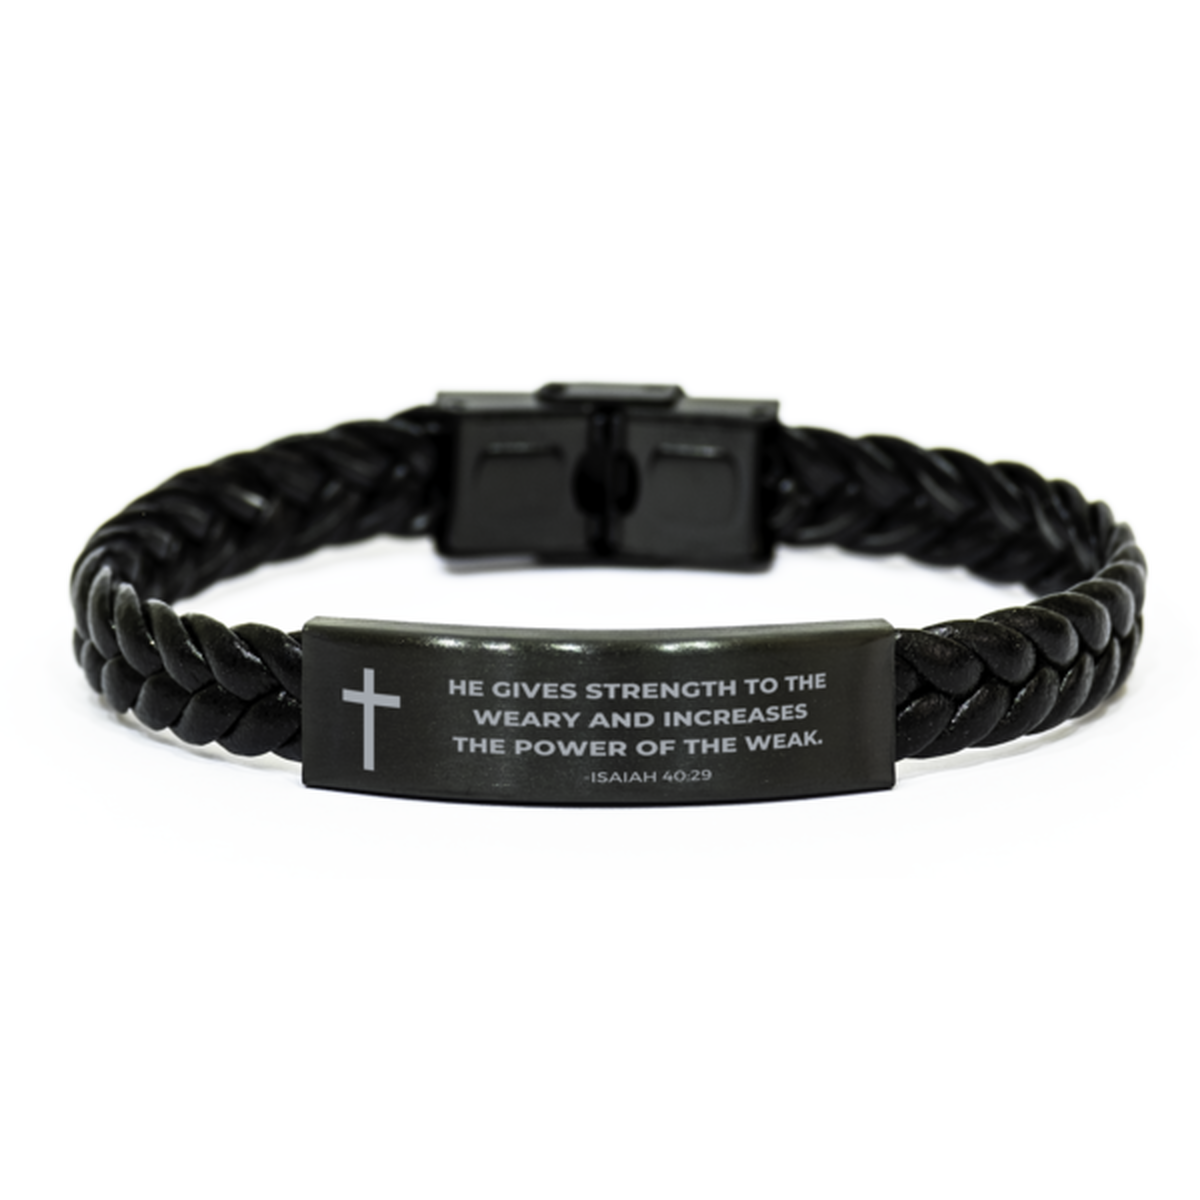 Baptism Gifts For Teenage Boys Girls, Christian Bible Verse Braided Leather Bracelet, He gives strength to the weary, Catholic Confirmation Gifts for Son, Godson, Grandson, Nephew